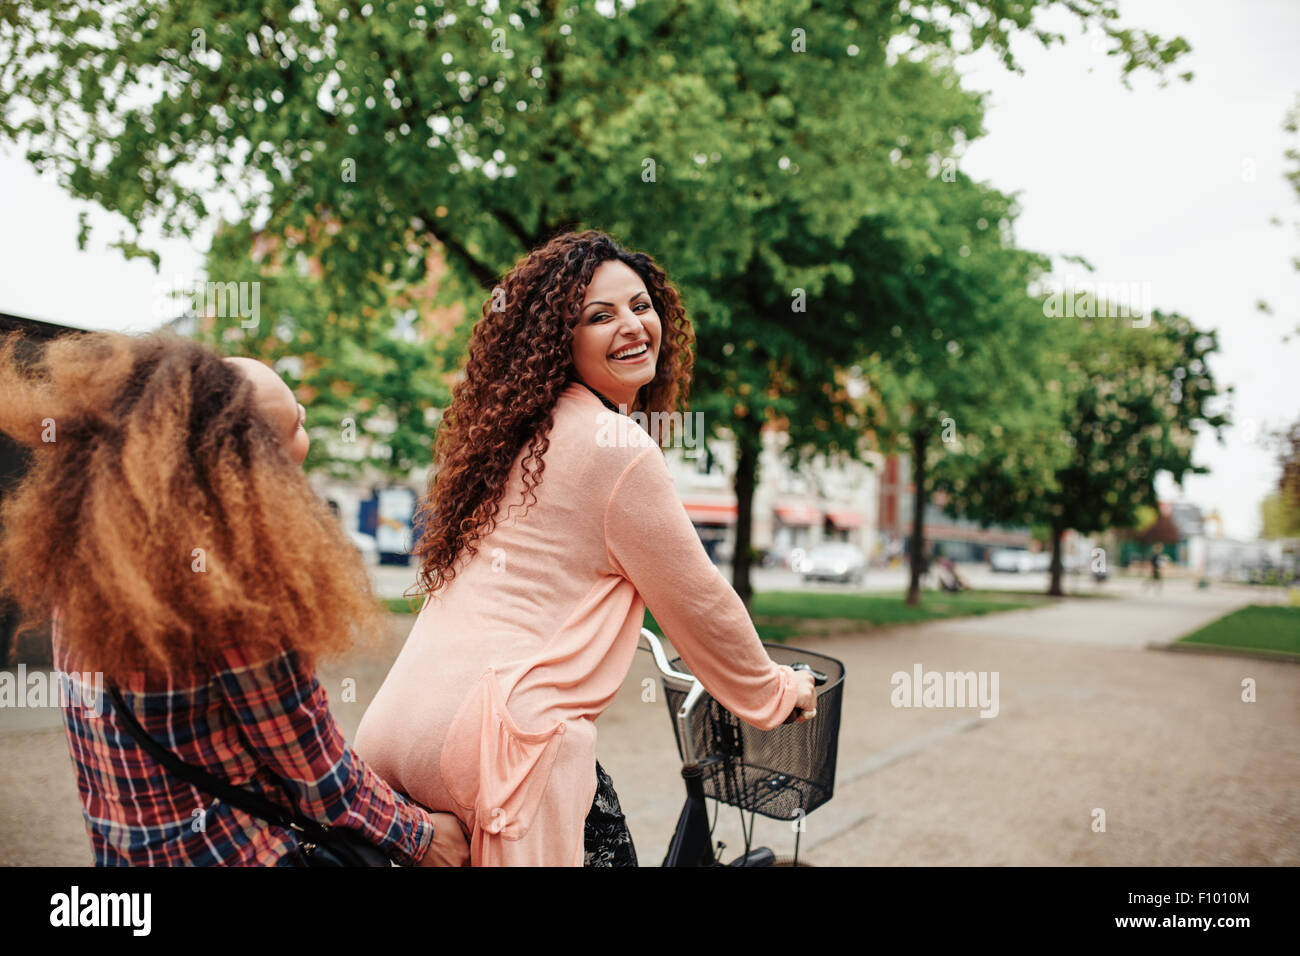 Portrait of beautiful young woman riding bicycle avec son amie. Female friends having fun on cycle ride on city street. Banque D'Images